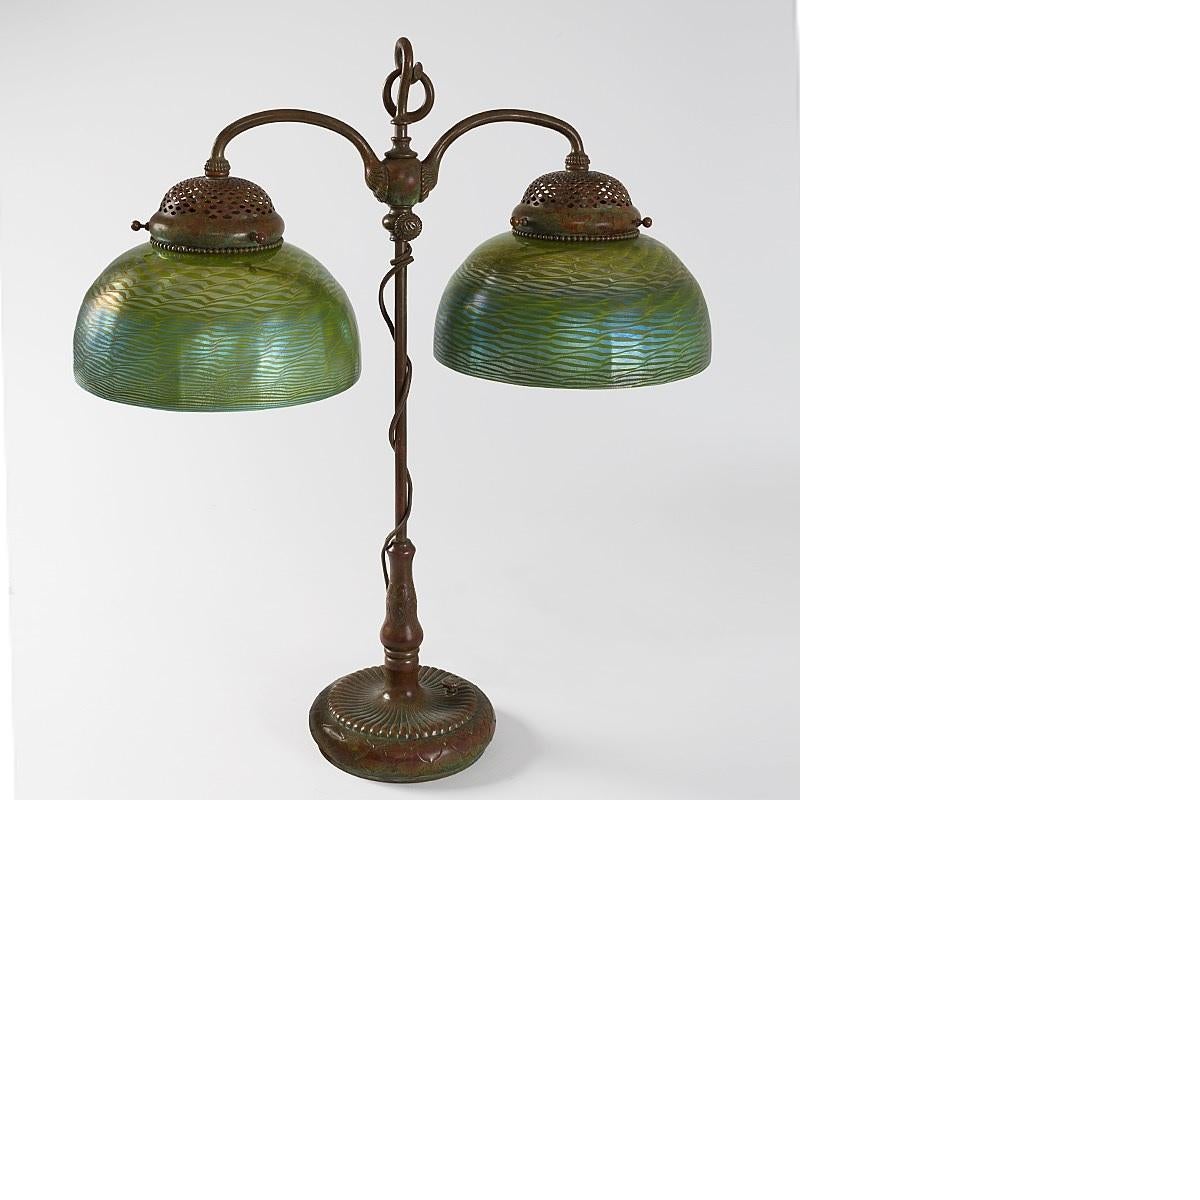 A Tiffany Studios New York patinated bronze and Favrile glass 